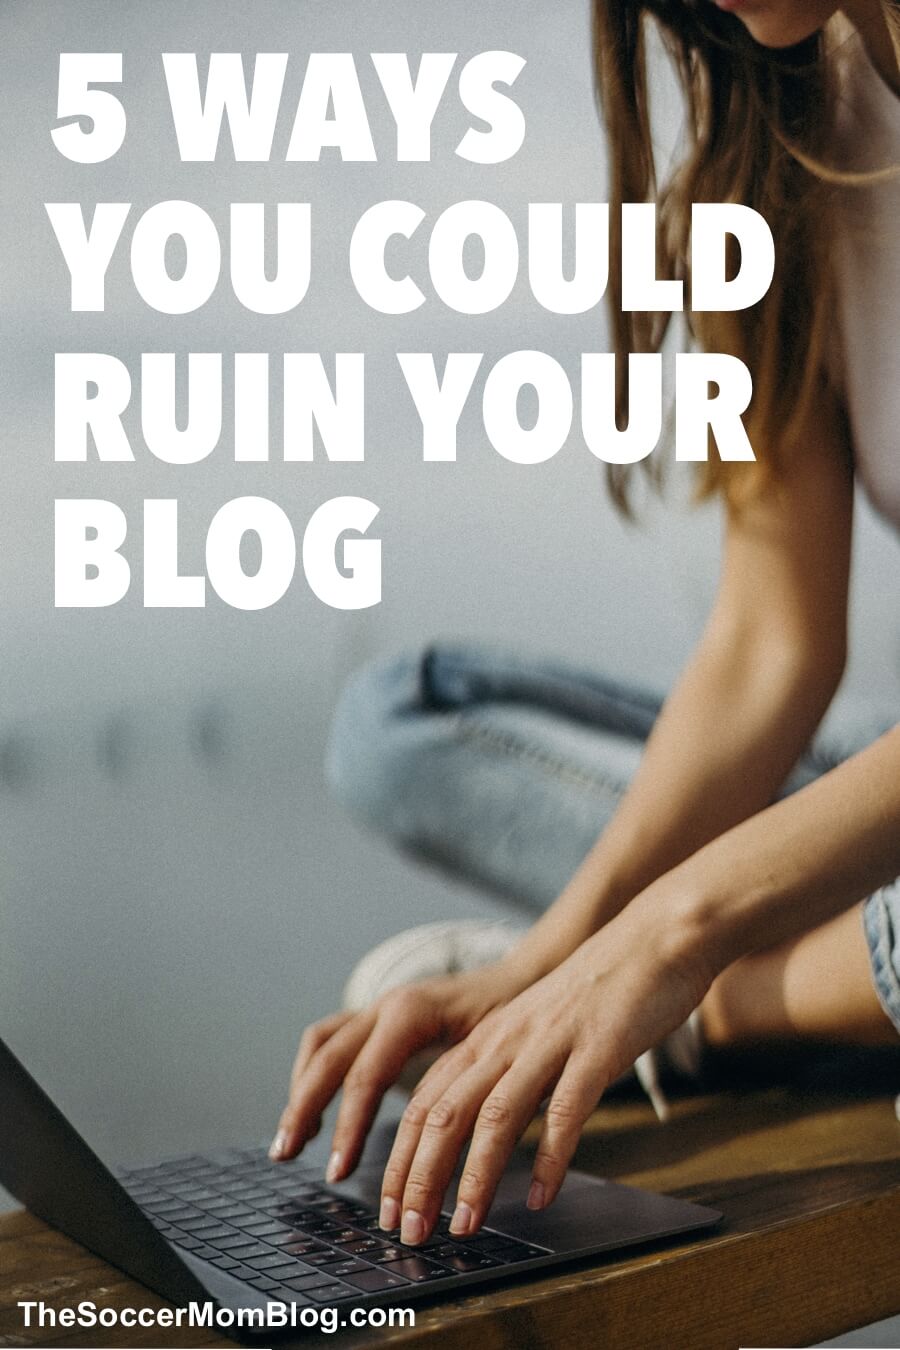 STOP! Before you start a blog, read this first! We're breaking down 5 common beginner blogging mistakes - most new bloggers make these mistakes, but you don't have to! 